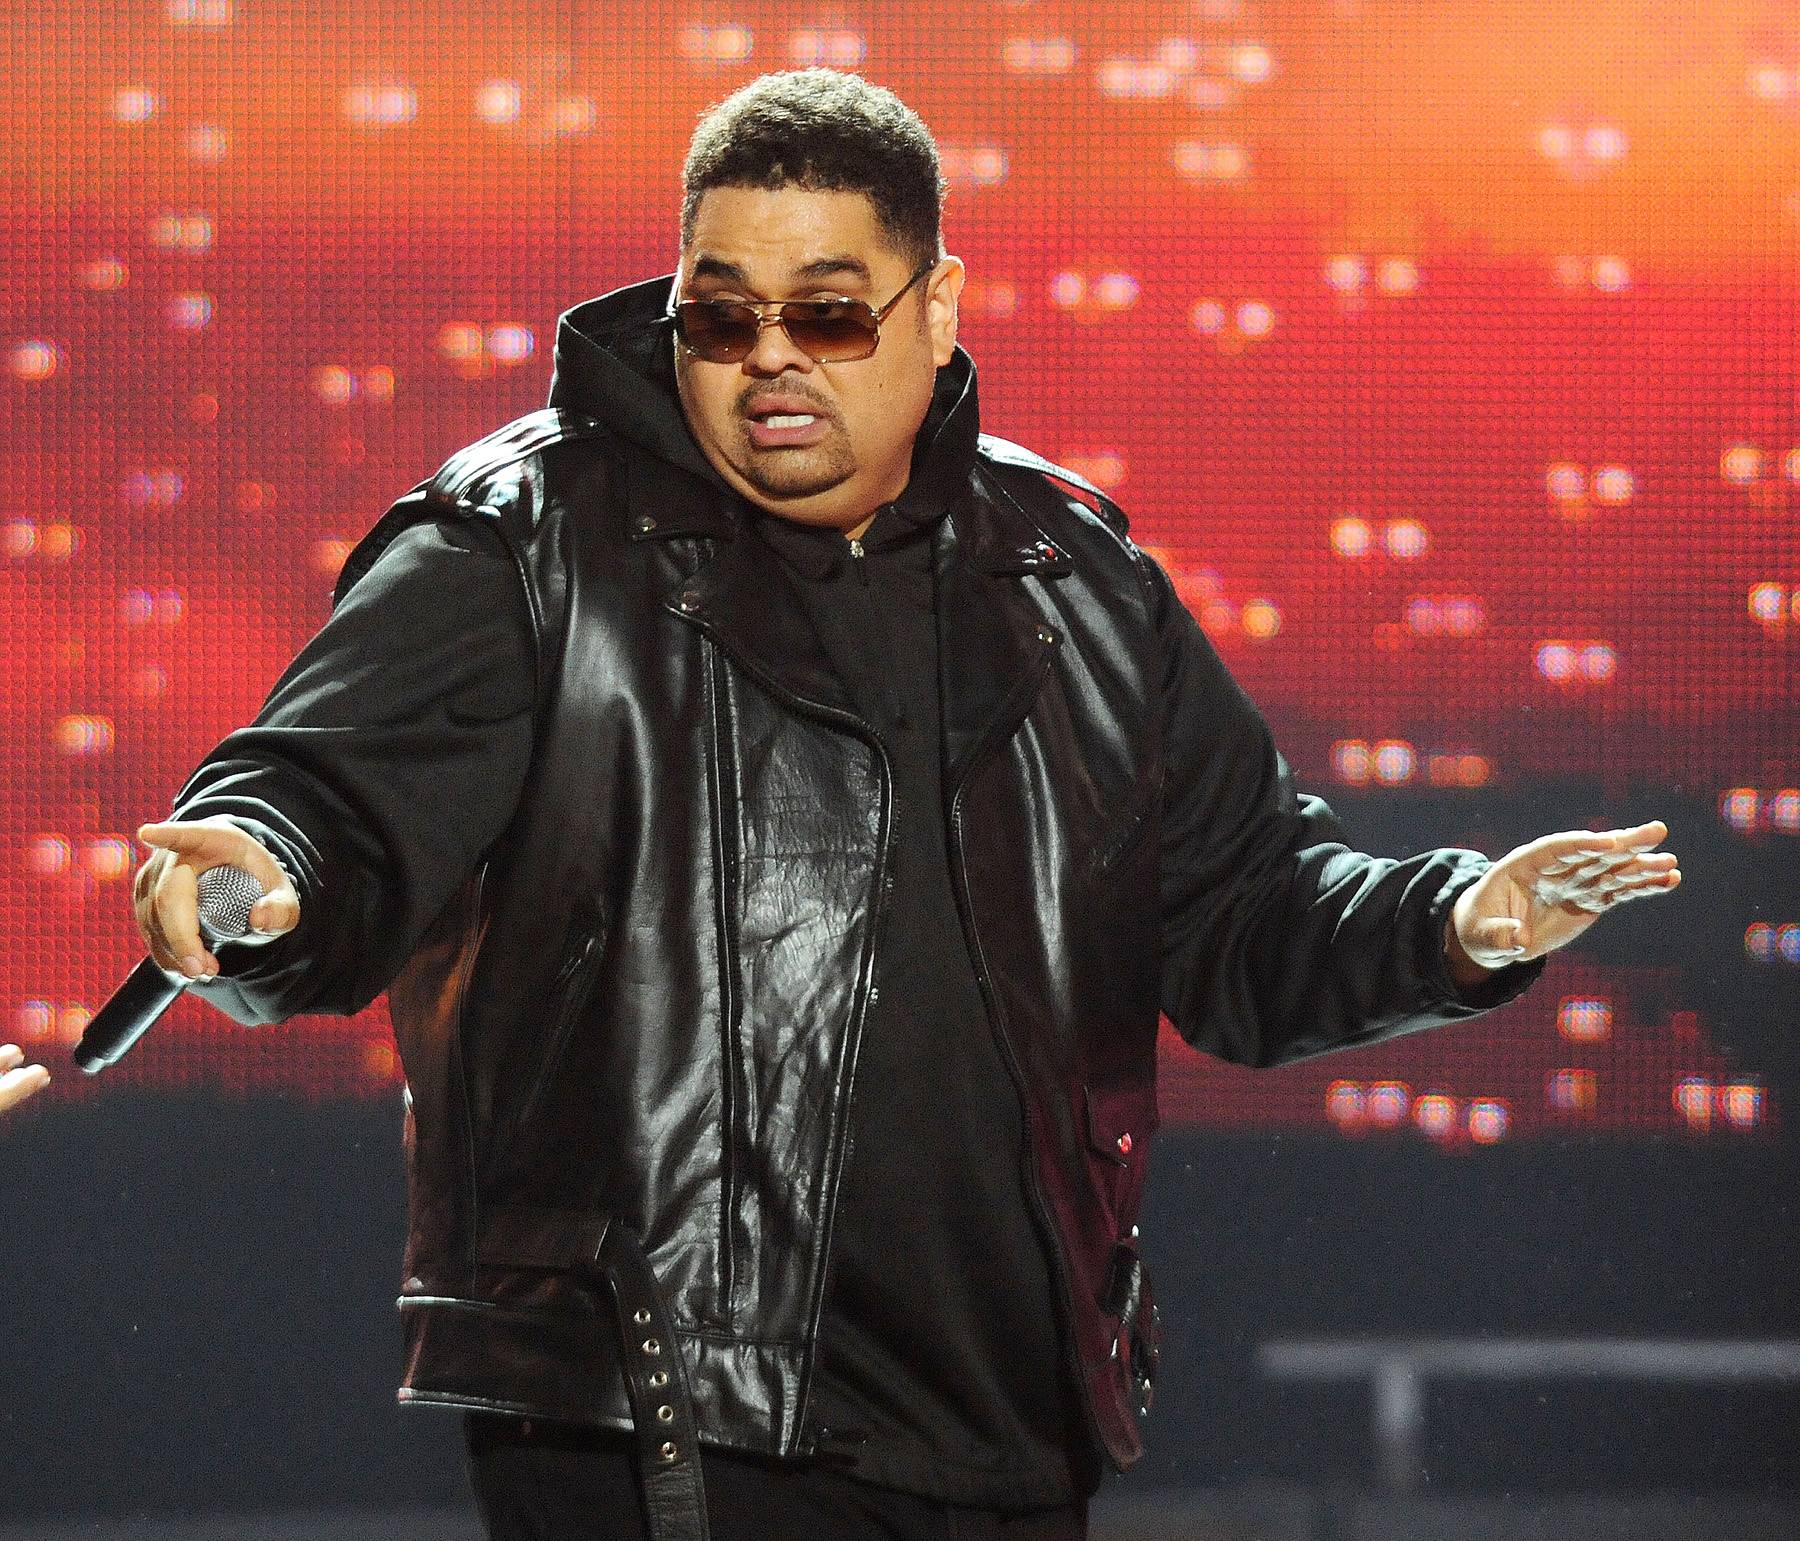 BET Hip Hop Awards Image 14 from In Memory of Heavy D Photo Gallery